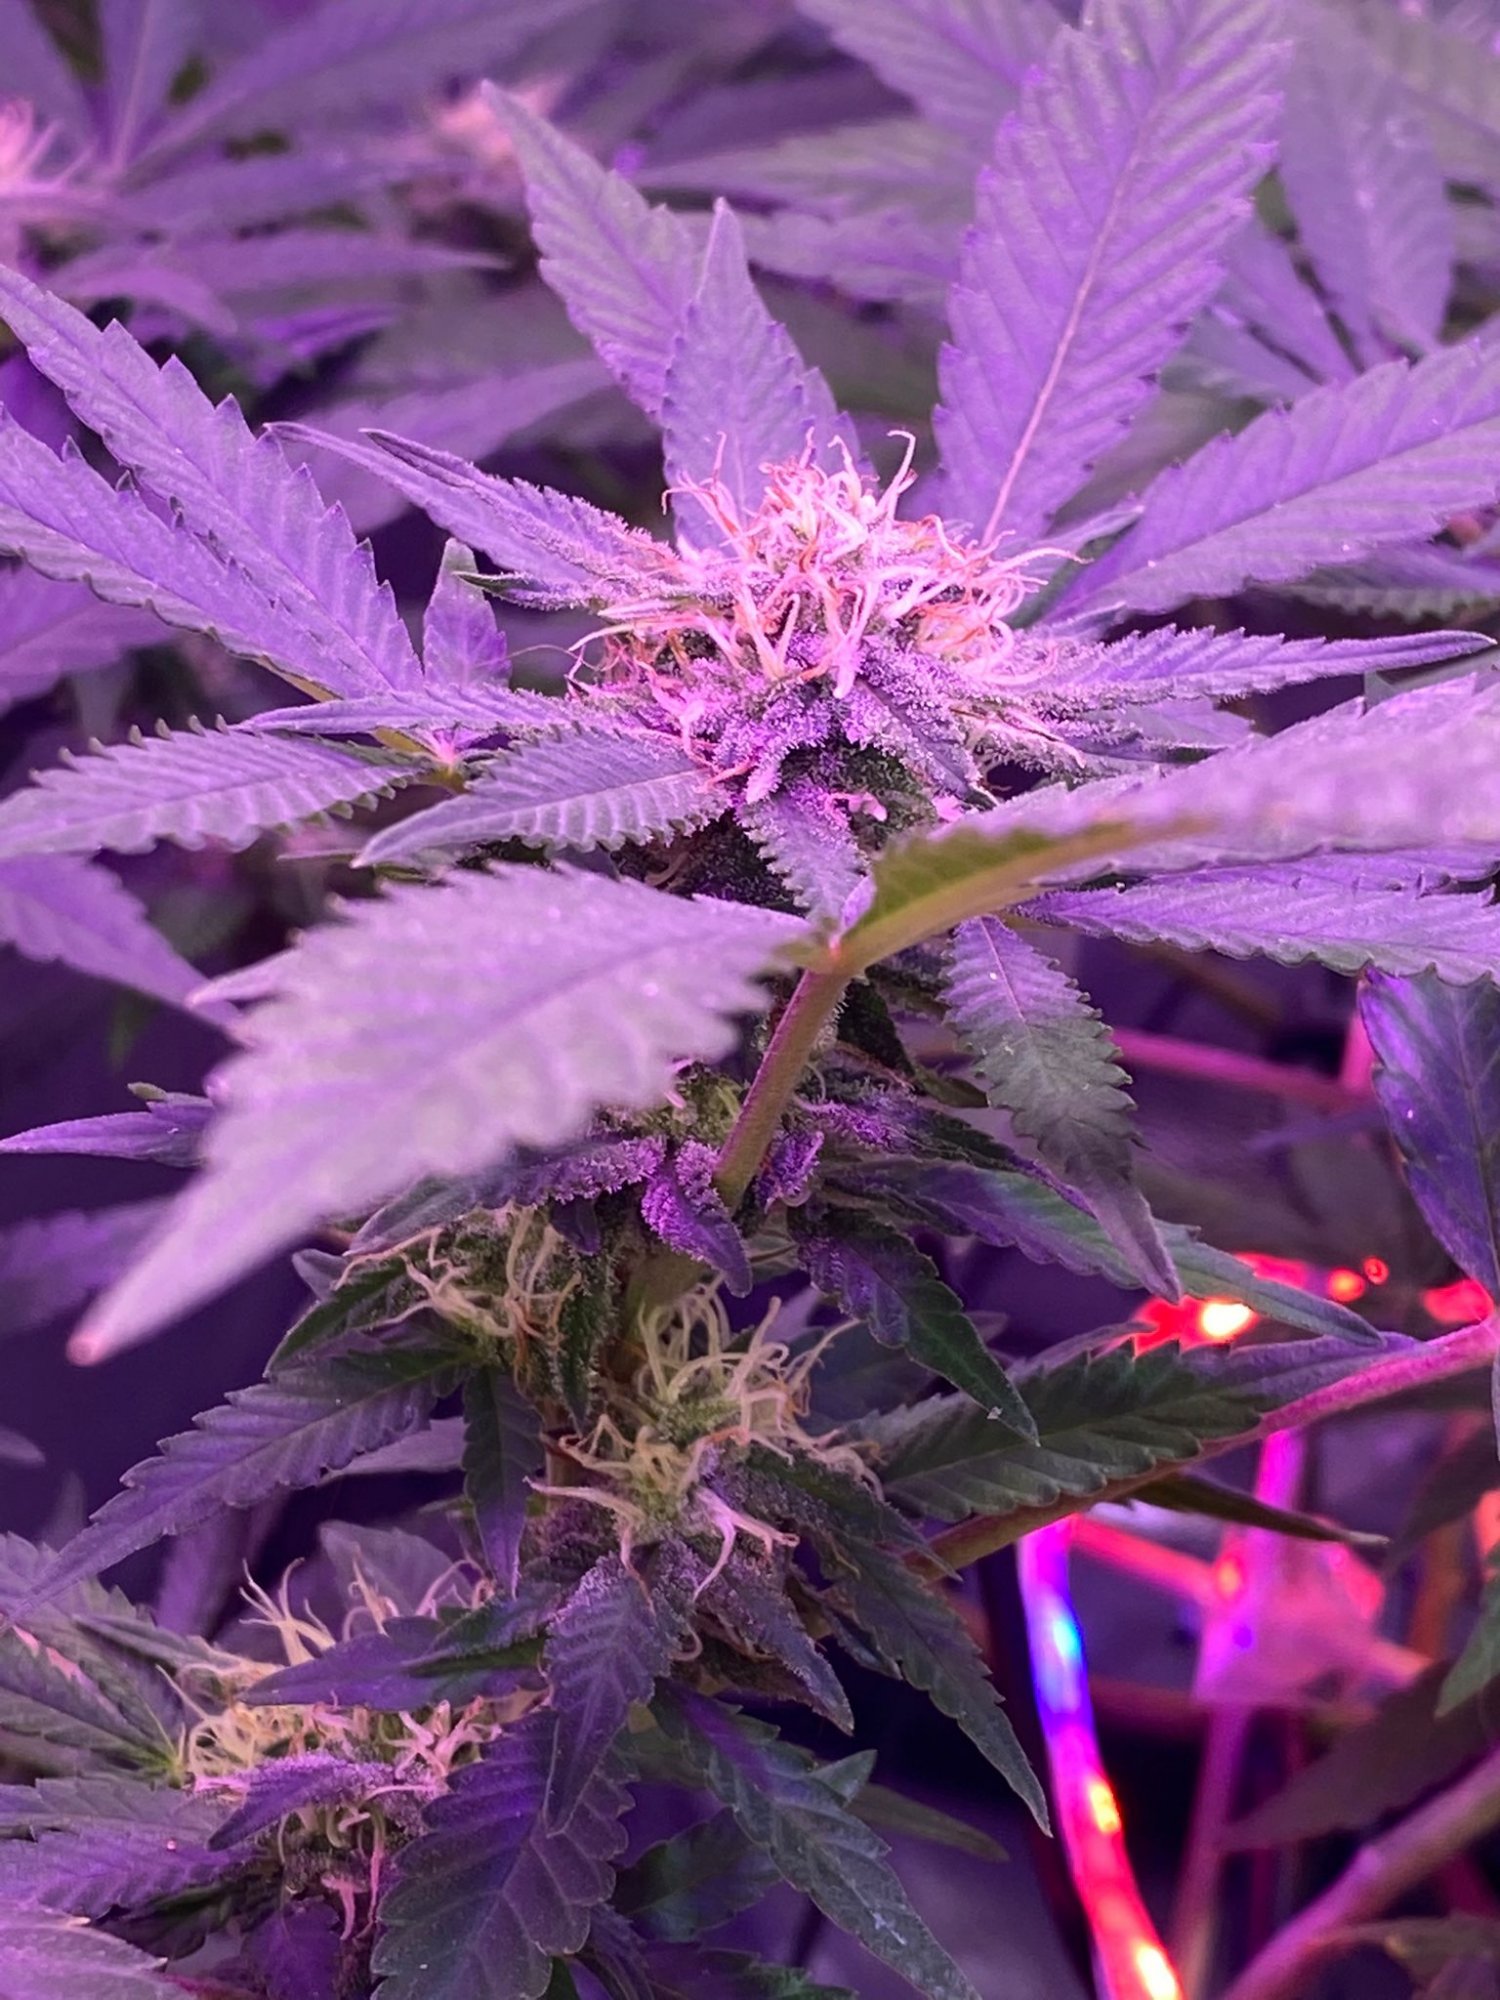 Mid flowering brown pistils and ppm clarifications 4